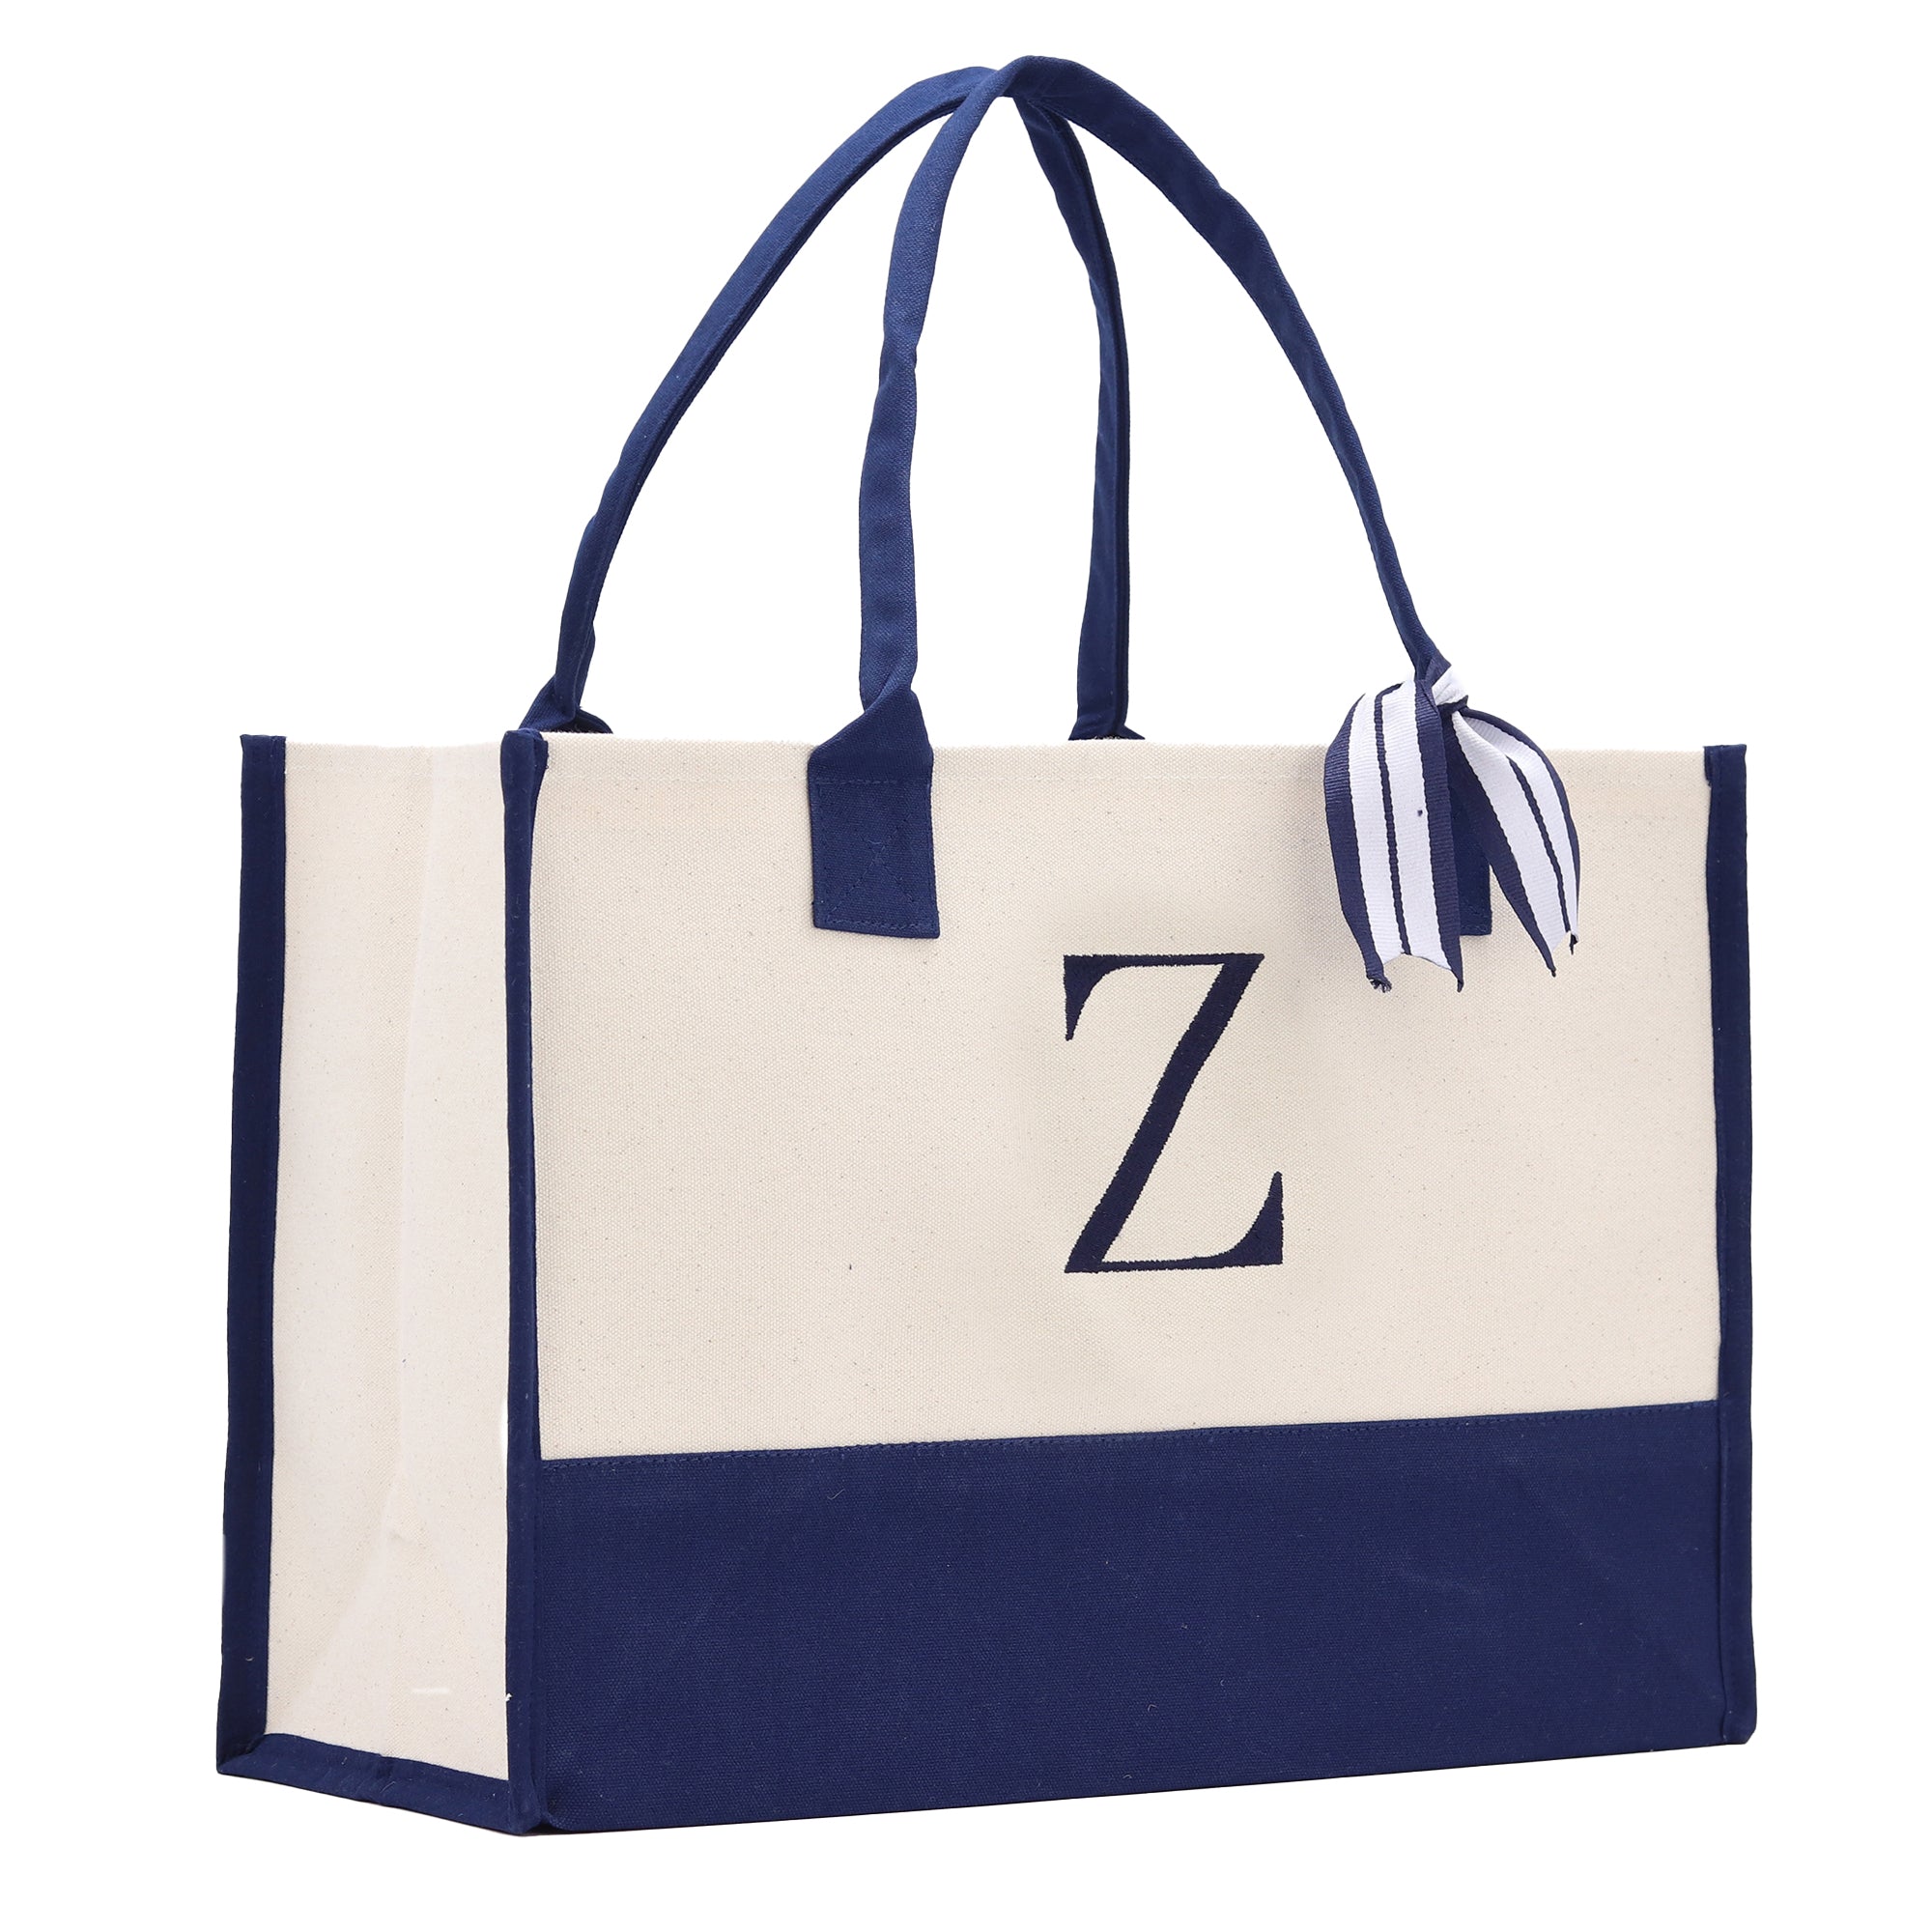 Monogram Tote Bag with 100% Cotton Canvas and a Chic Personalized Monogram Navy Blue Vanessa Rosella Block Z 